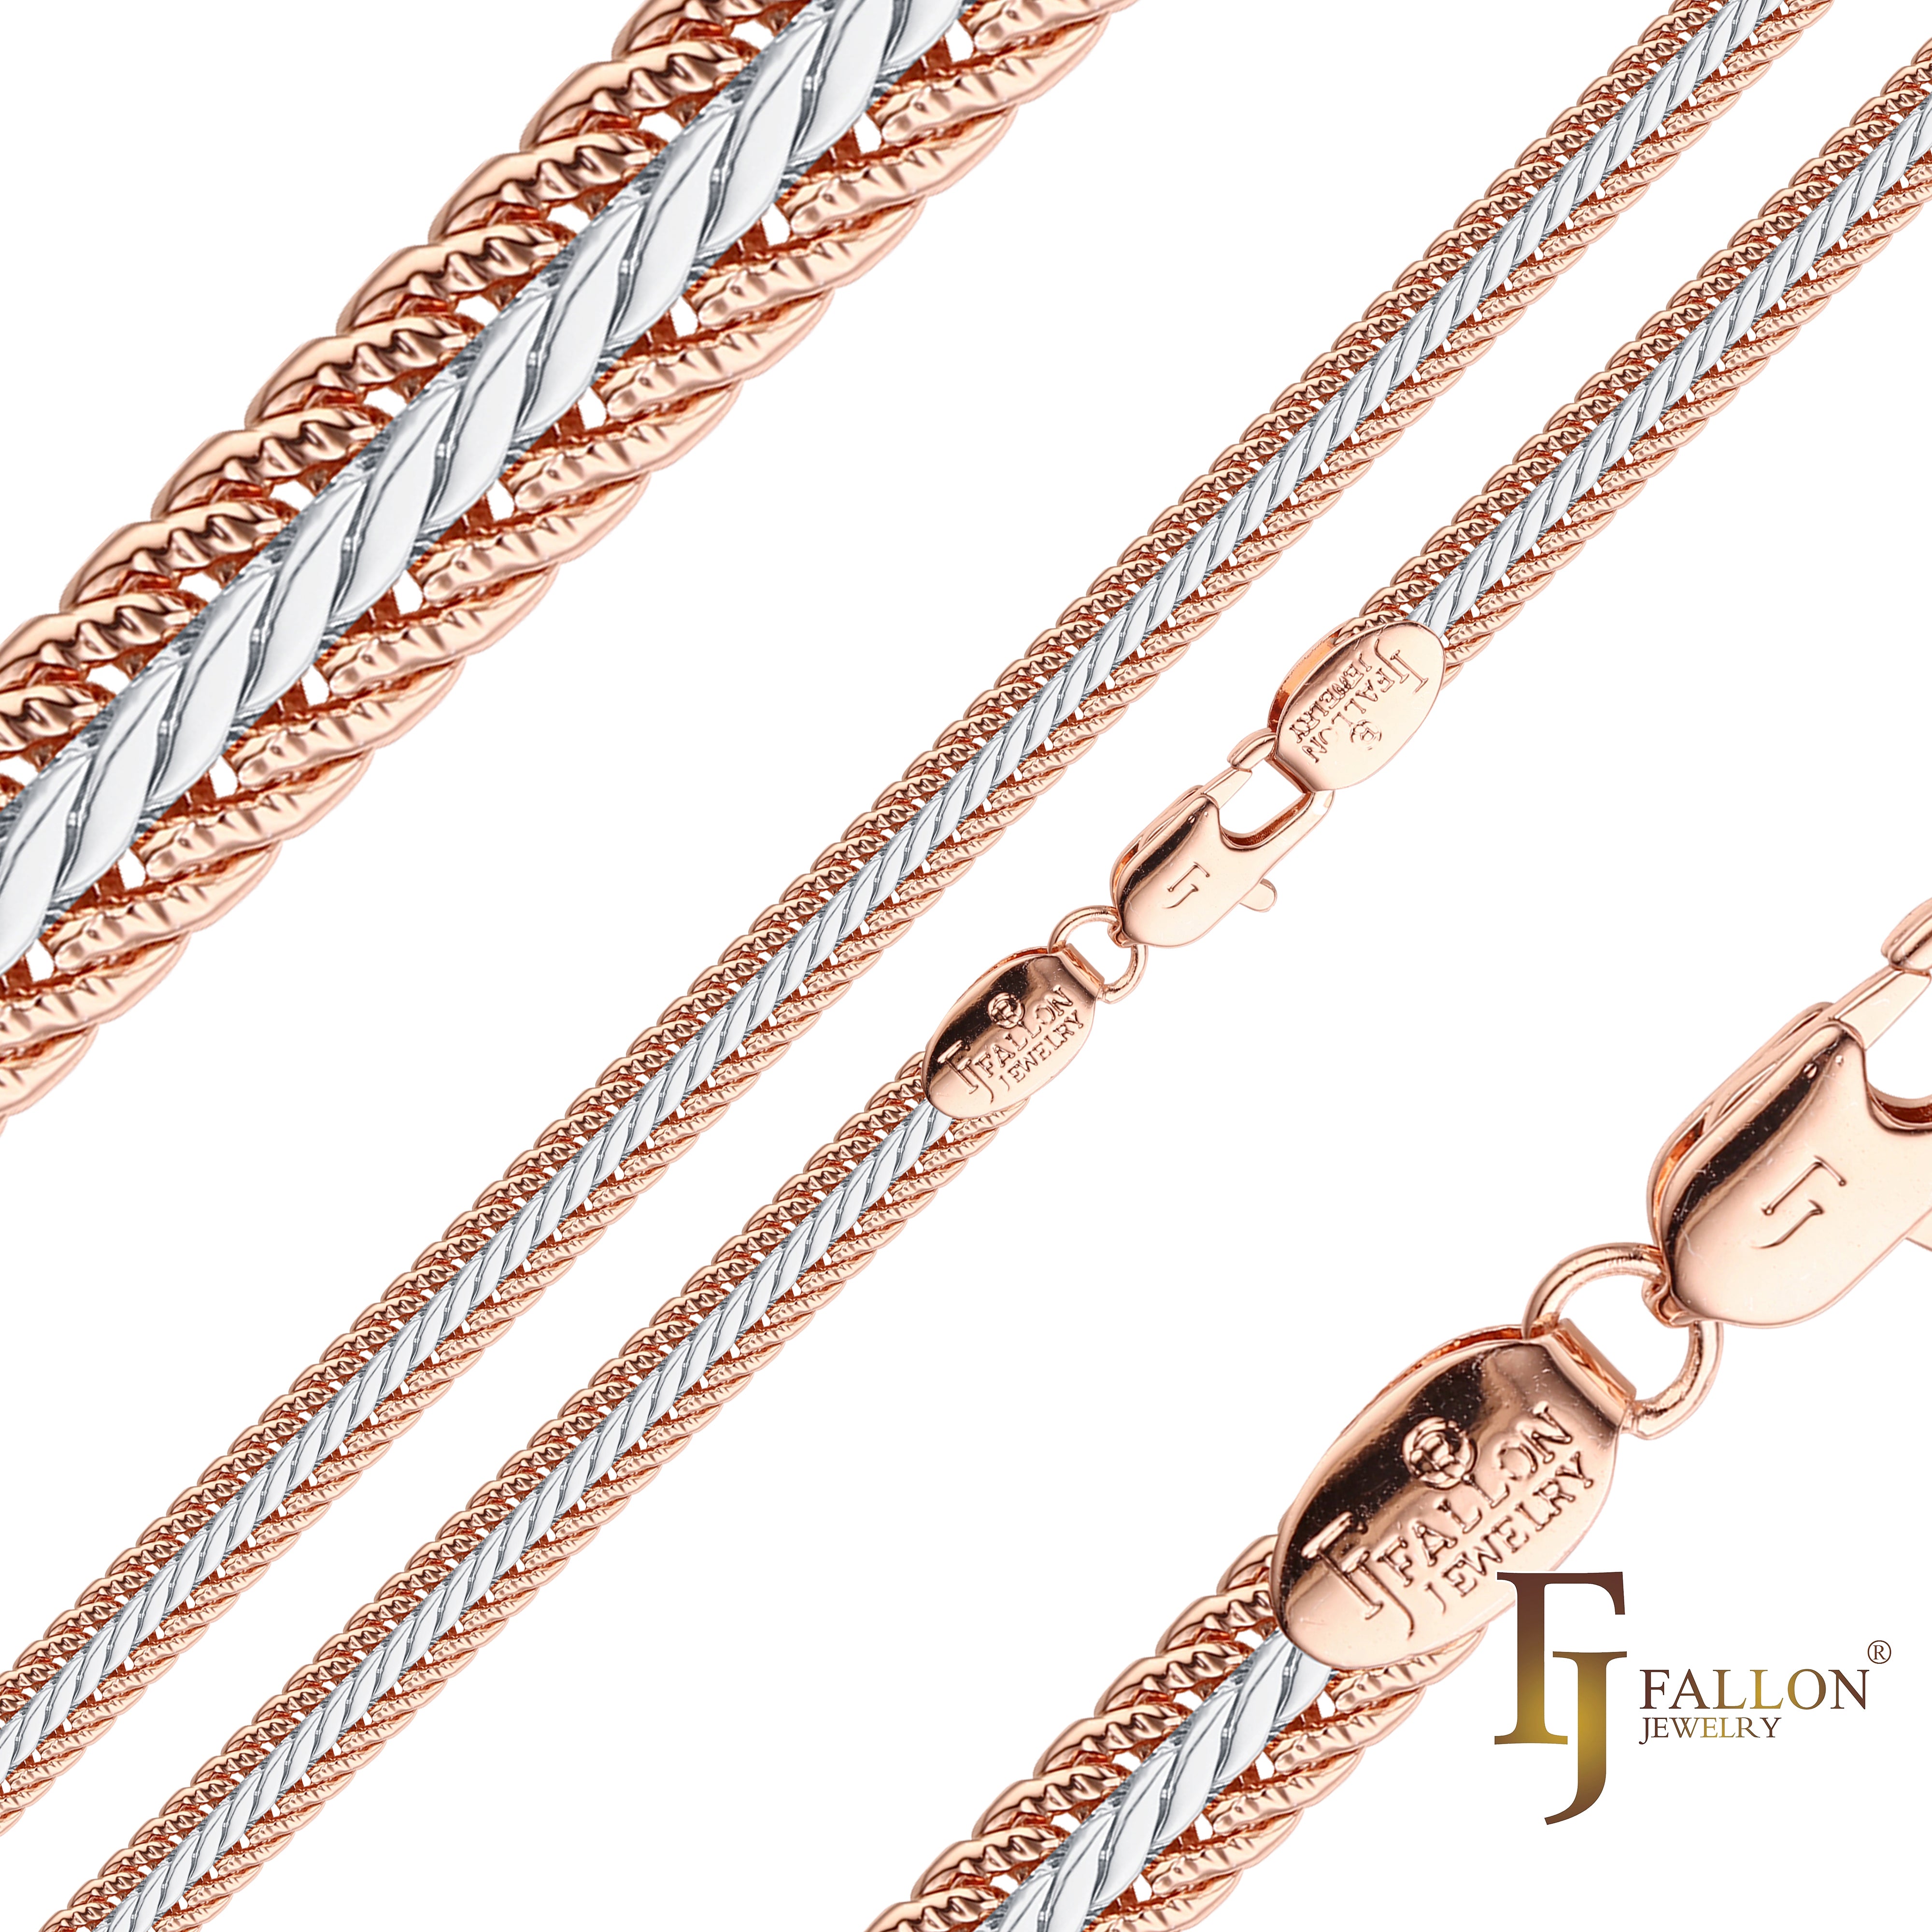 Foxtail compact link hammered 14K Gold, Rose Gold, two tone white gold chains